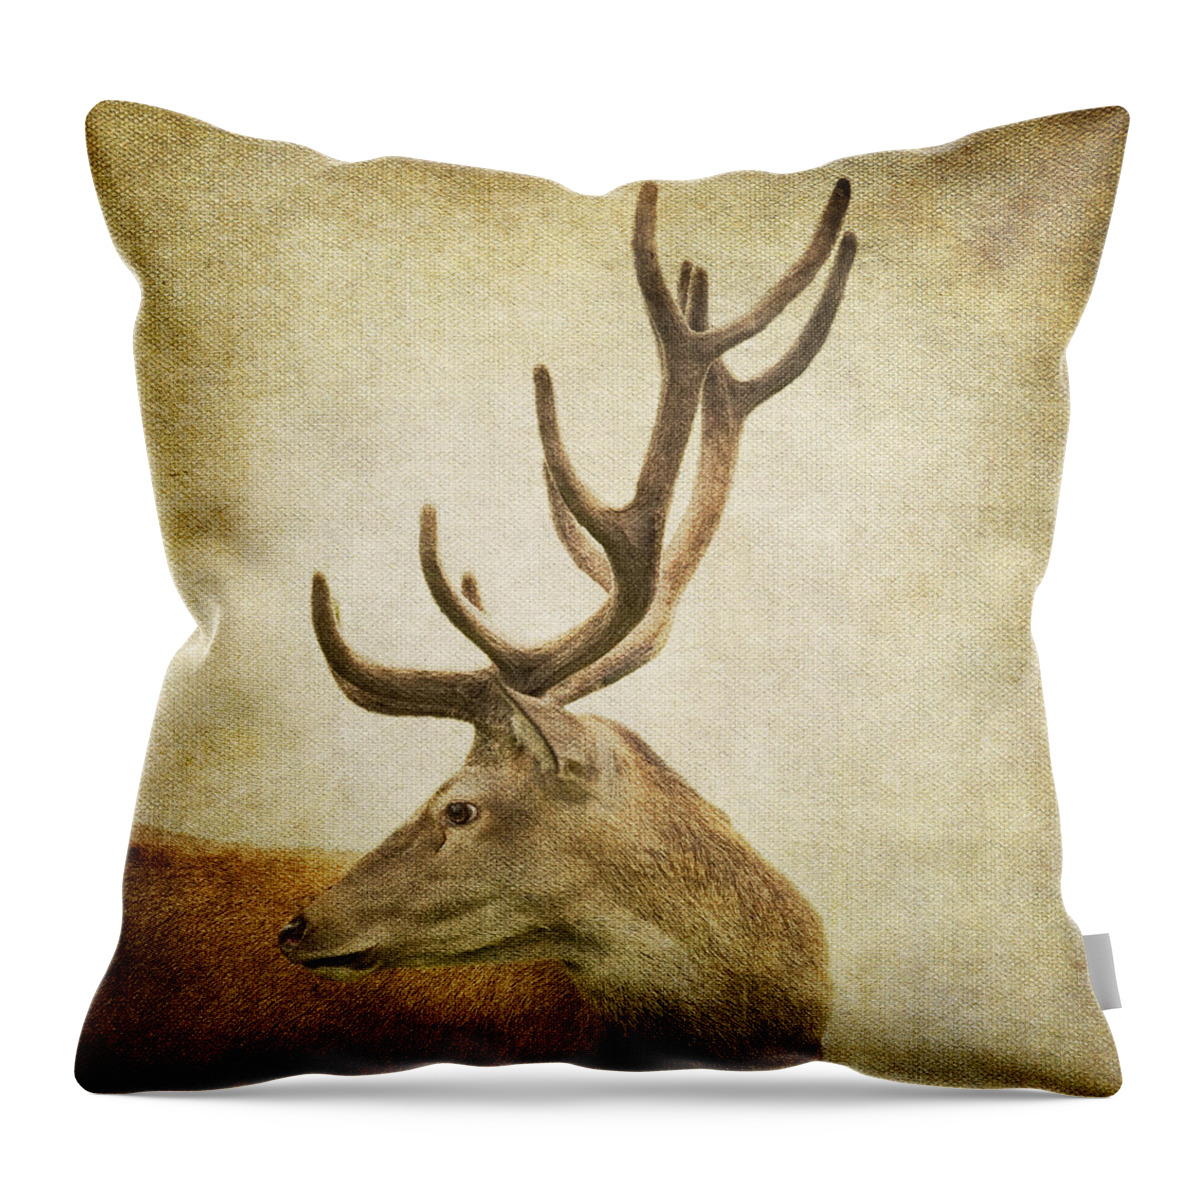 Animal Themes Throw Pillow featuring the photograph Deer Watching by By Eve Livesey